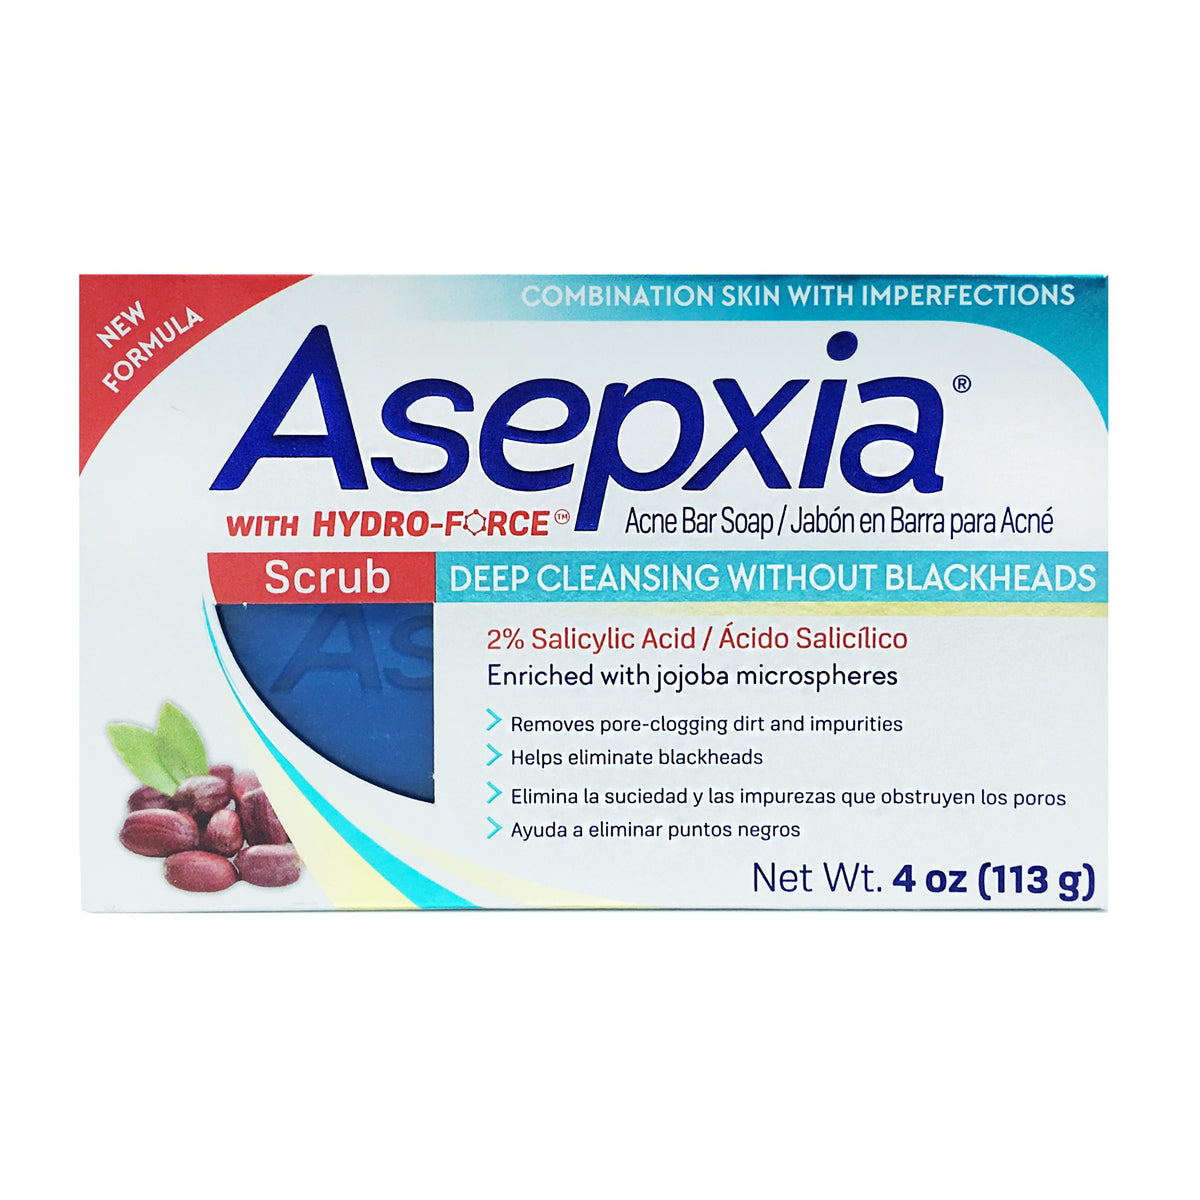 Asepxia Scrub Acne Bar Soap Deep Cleansing Without Blackheads, 4 Oz.